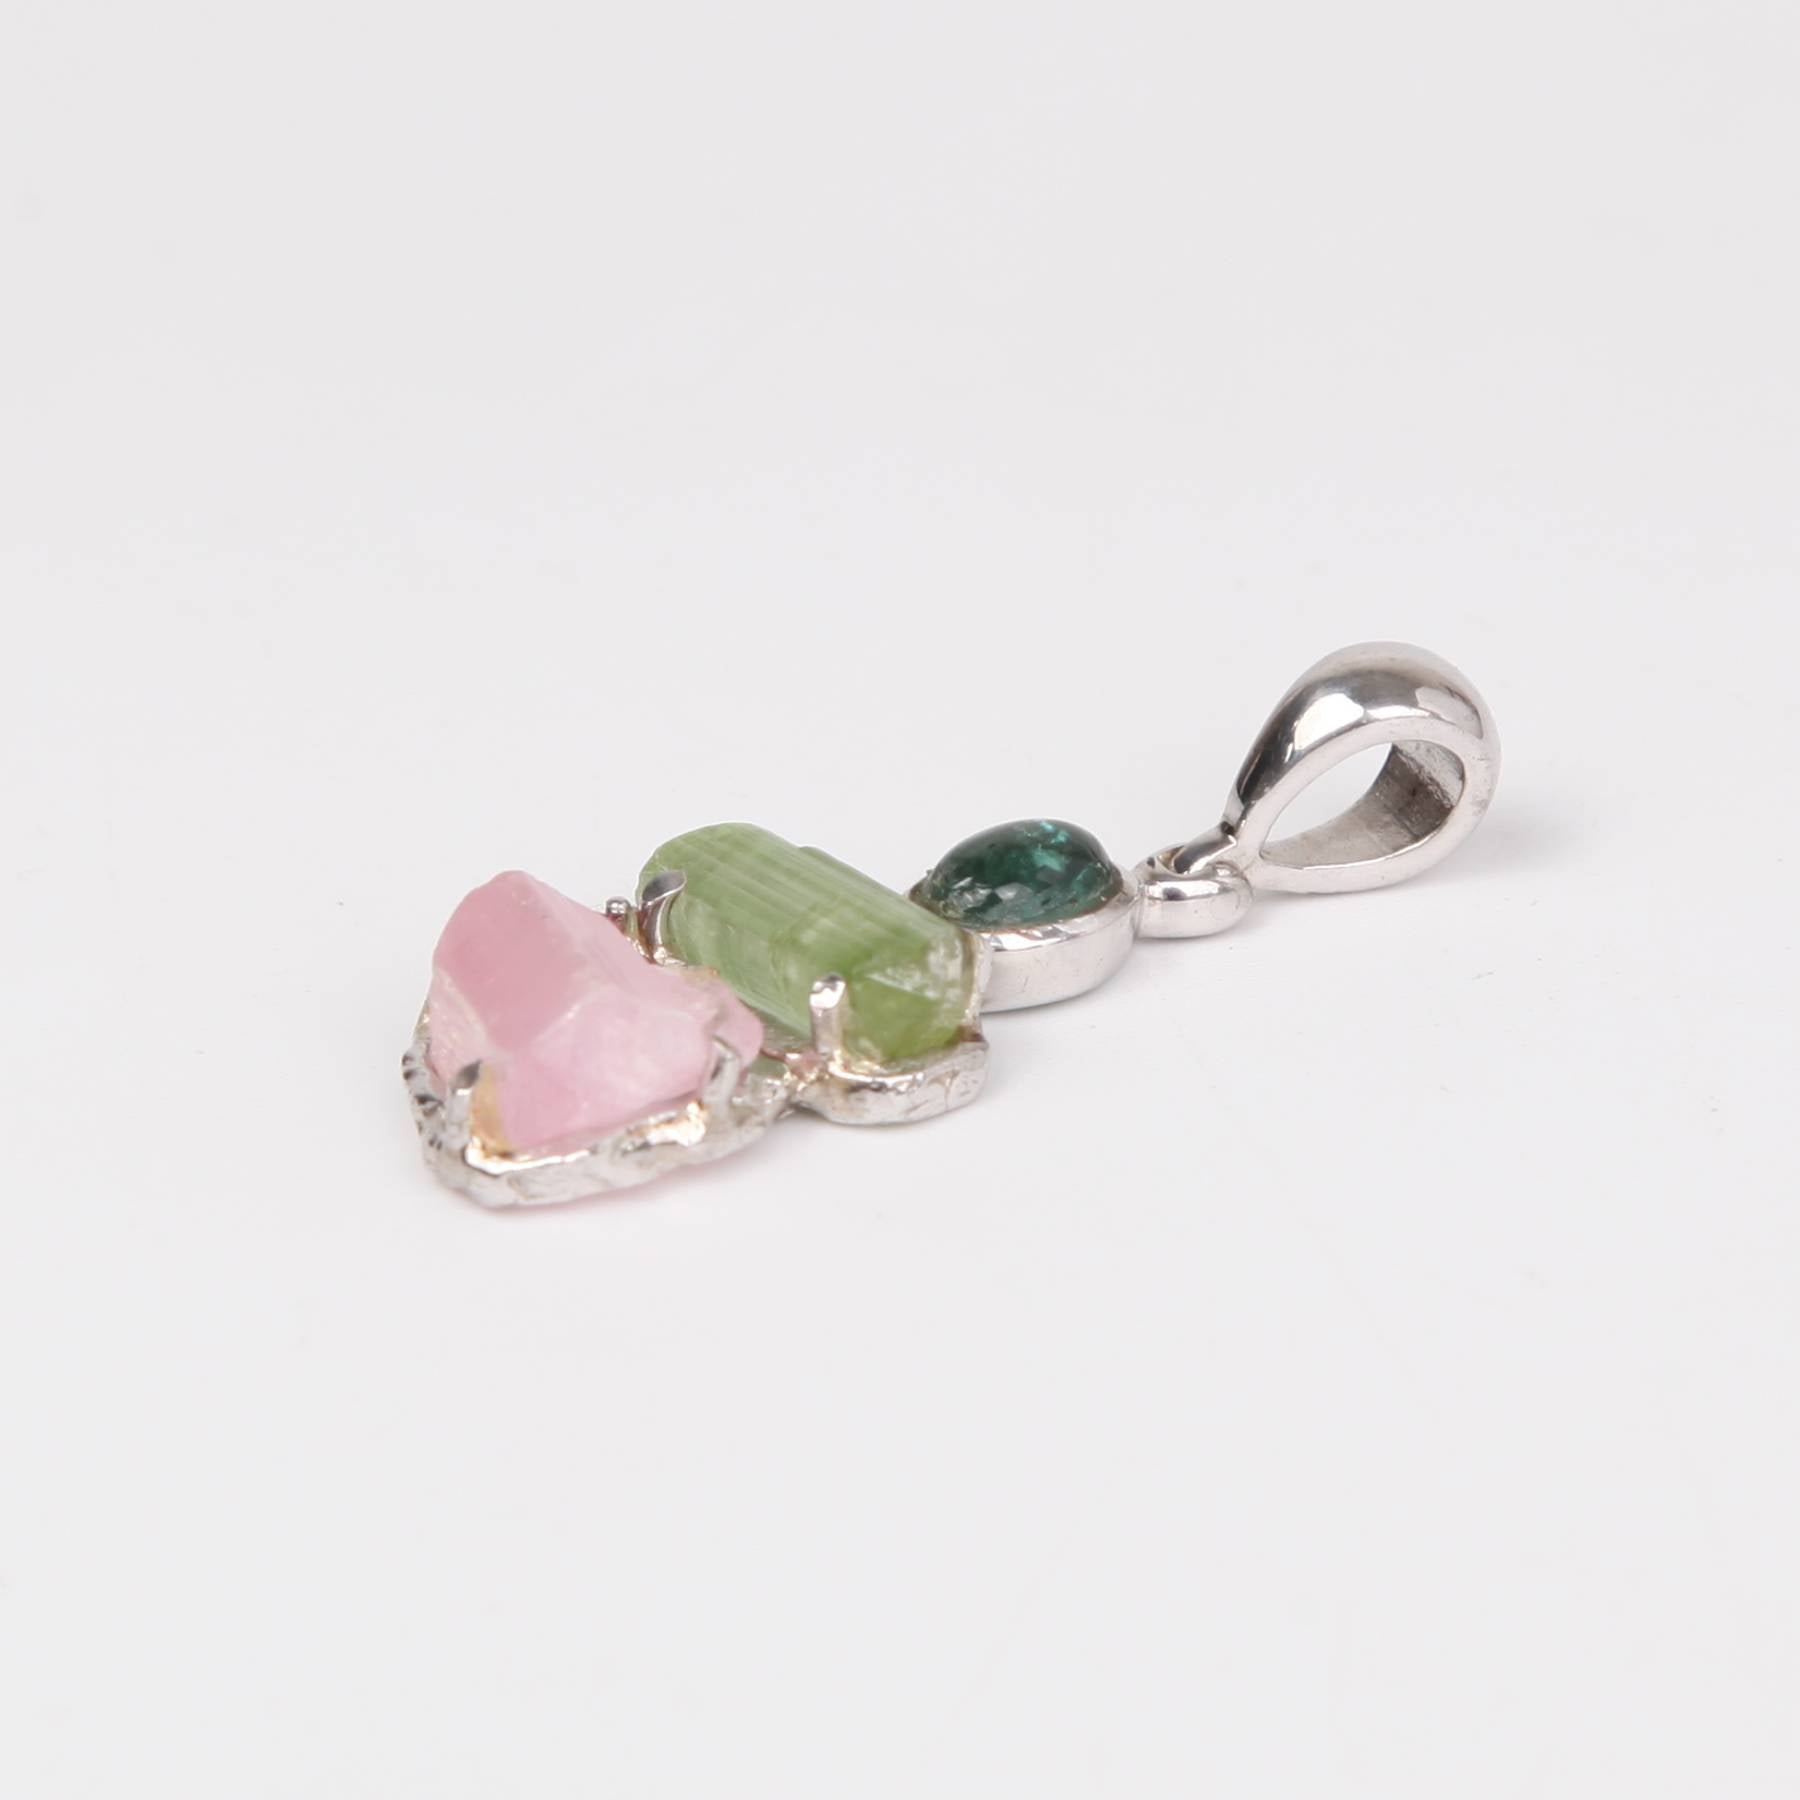 Sterling Silver Pendant with Rough Tourmaline (Pink, Green), Blue Tourmaline Cabochon and Pink Tourmaline (faceted)